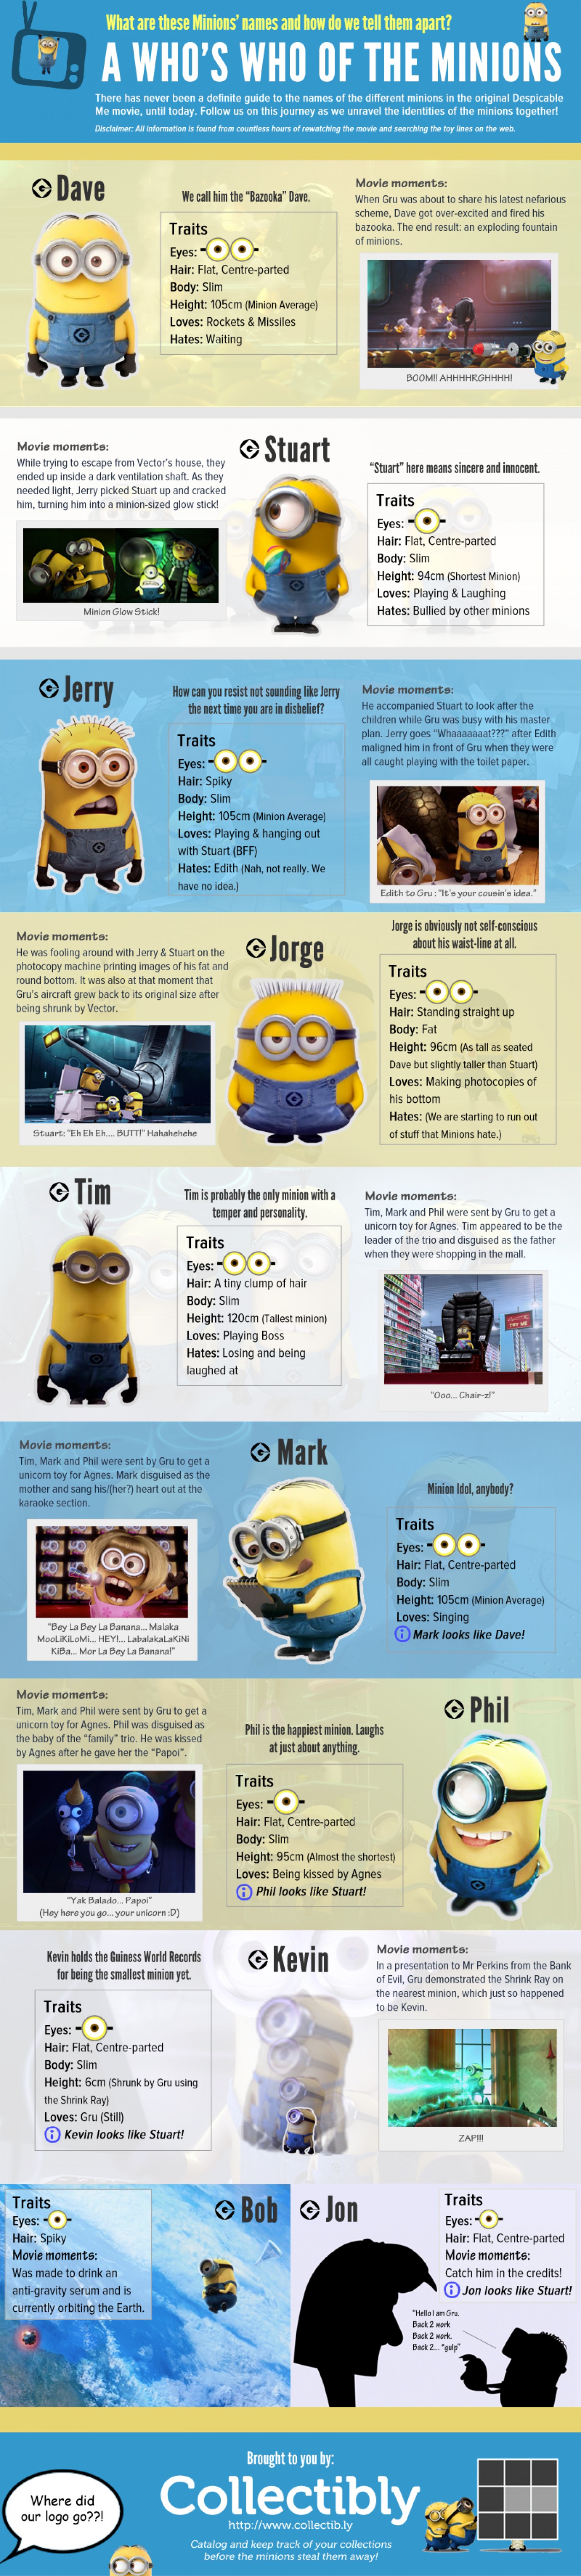 01 a-whos-who-of-the-minions_51d54556b6828_w1500